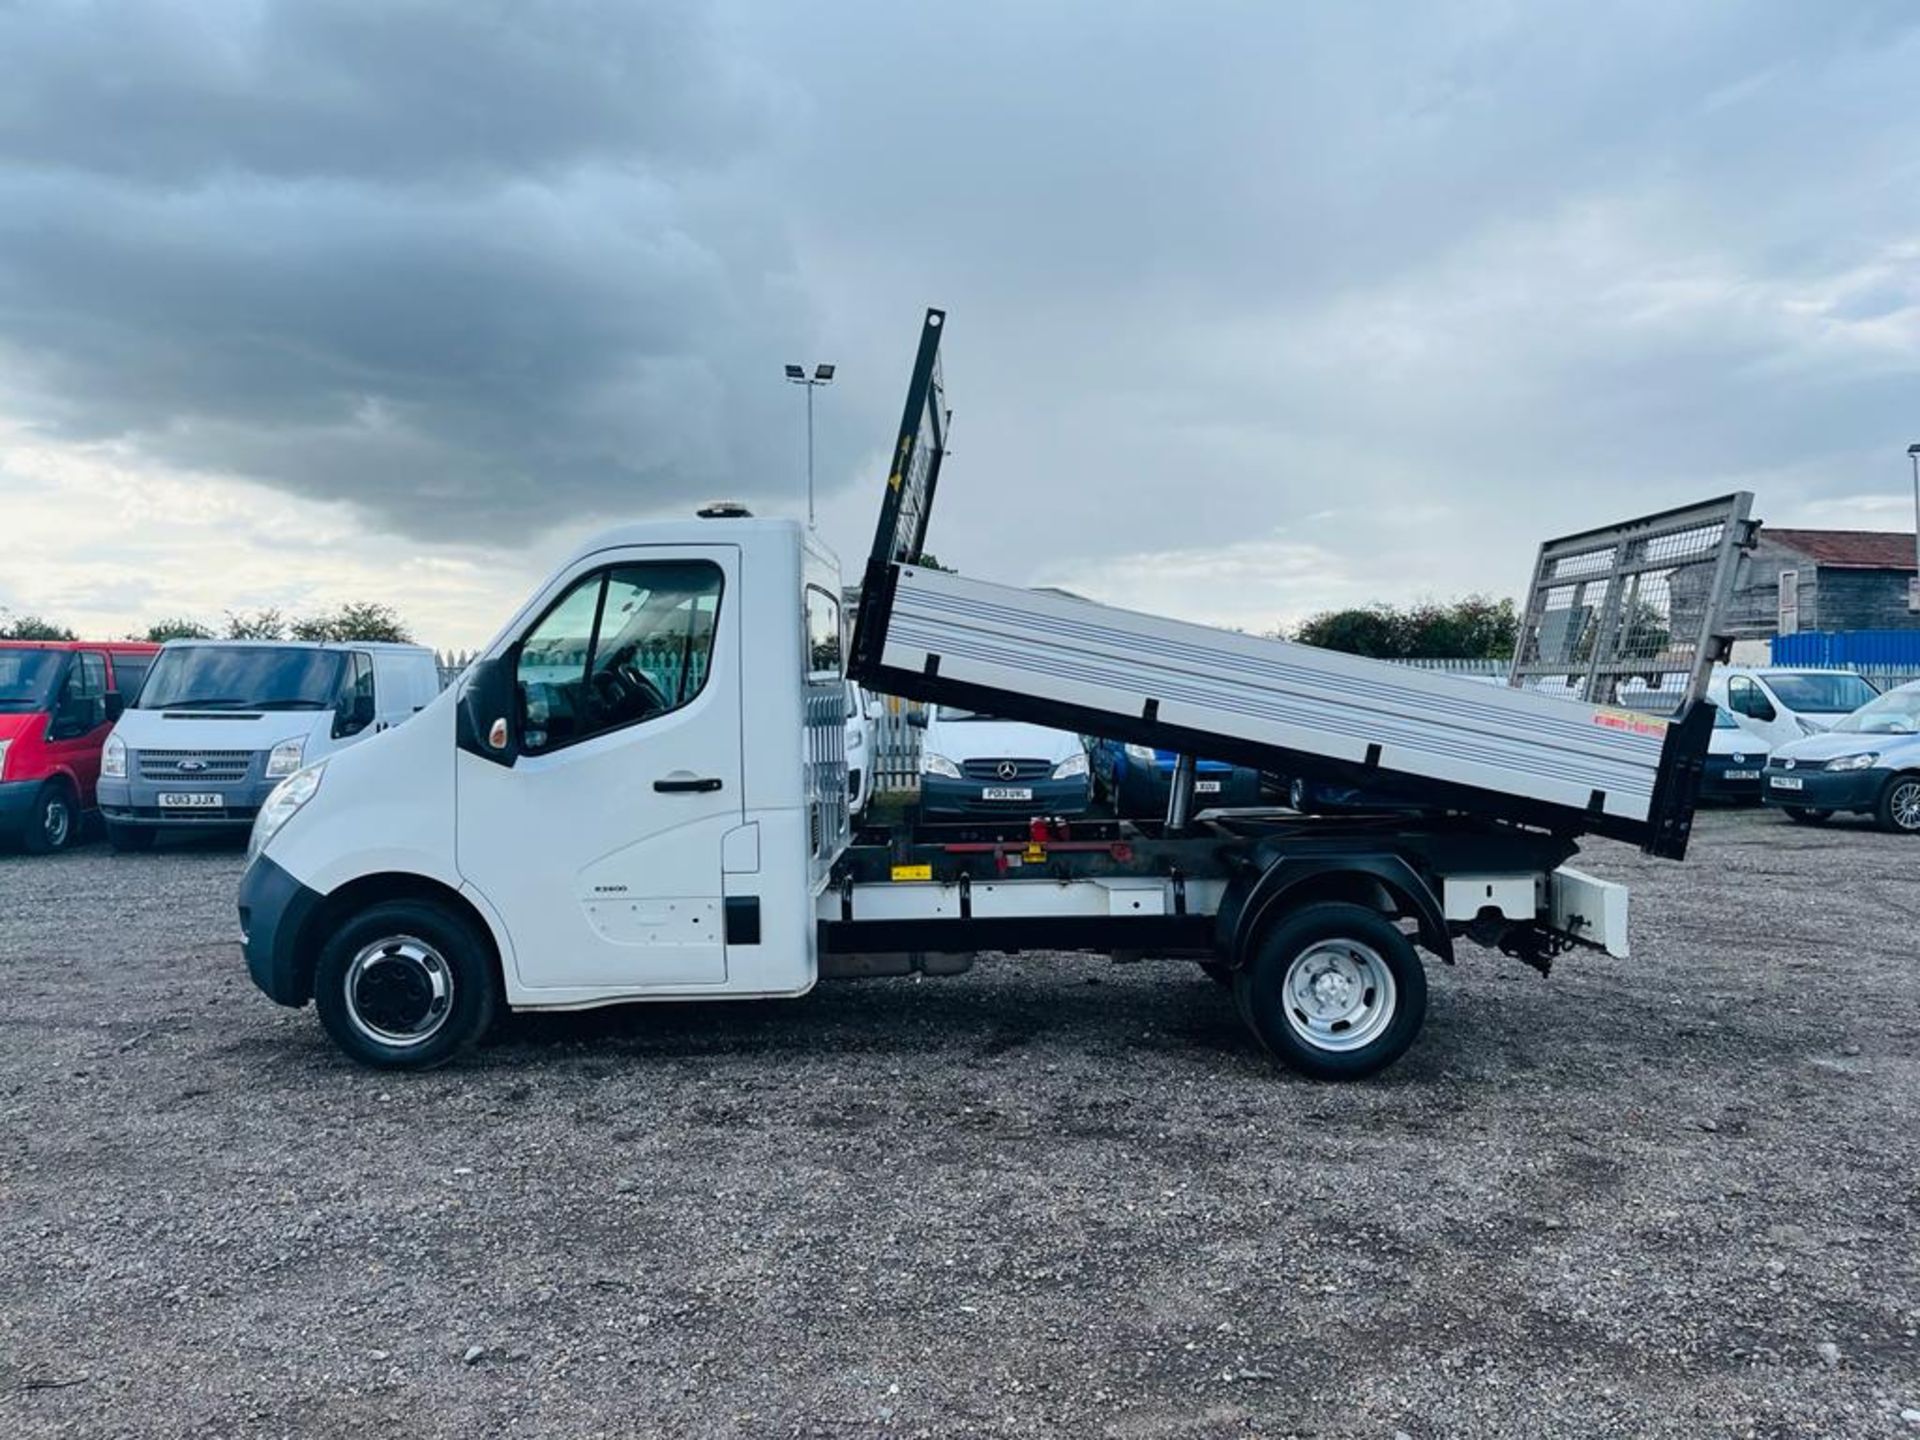 ** ON SALE ** Vauxhall Movano 2.3 CDTI RWD TRW R3500 2015 '15 Reg' Tipper - Only 110,779 Miles - Image 14 of 29